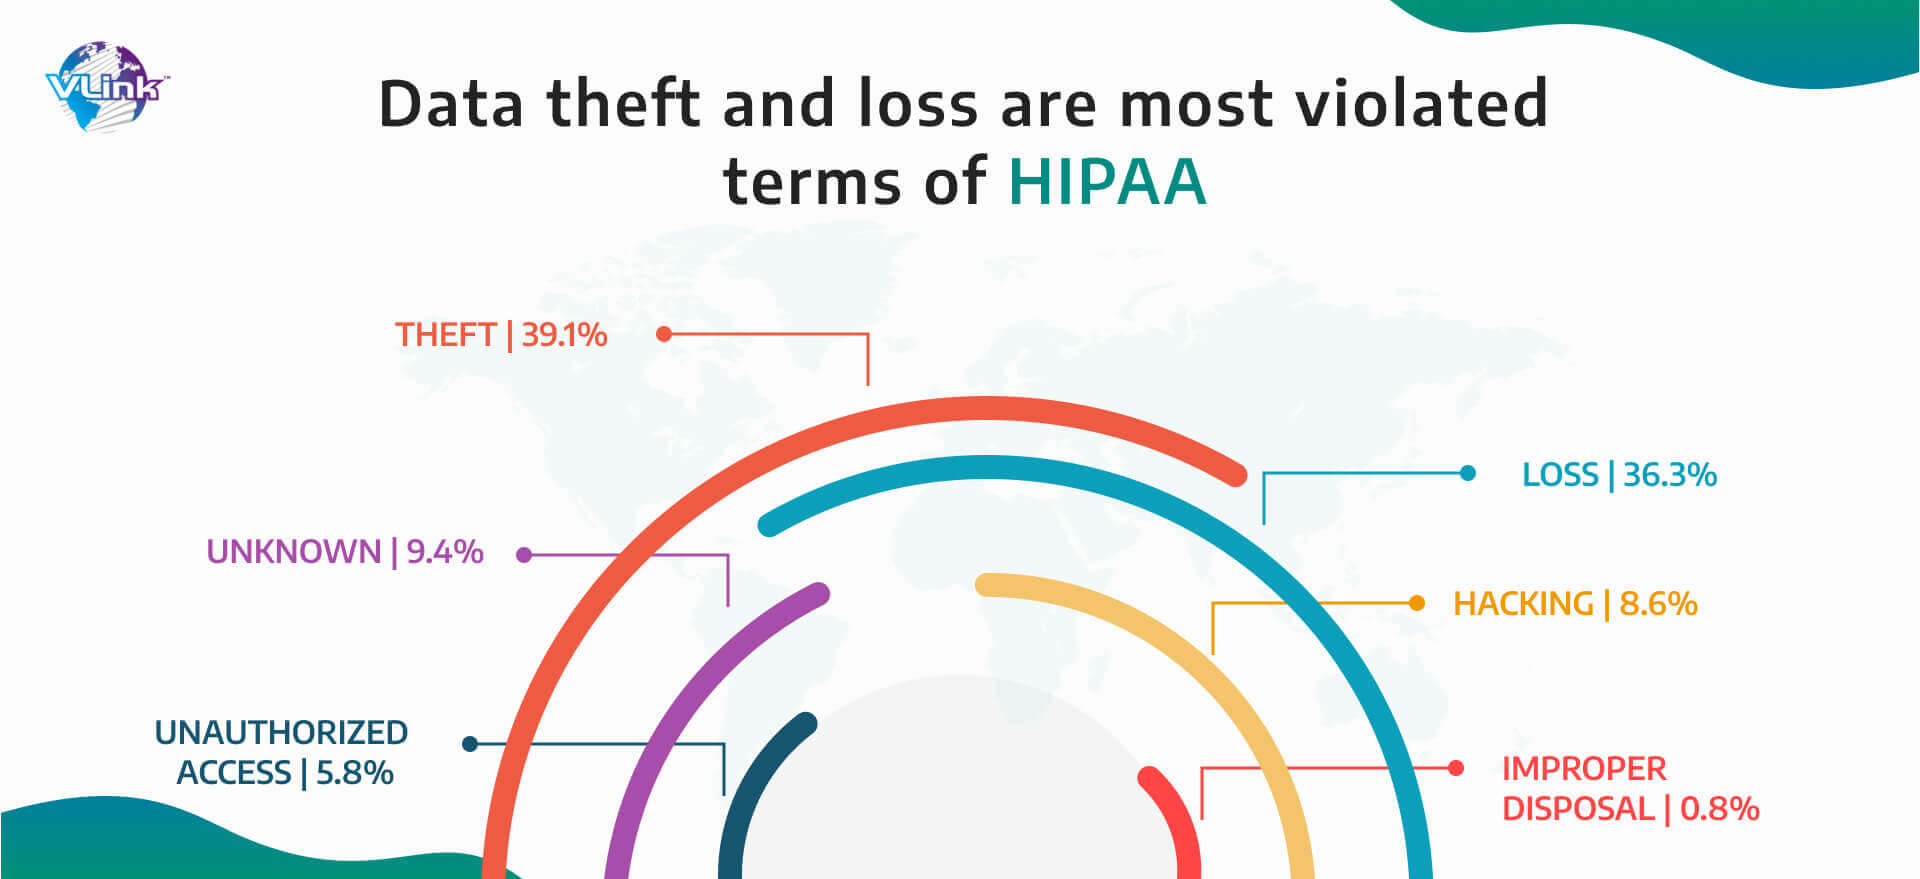 Data theft and loss are most violated terms of HIPAA